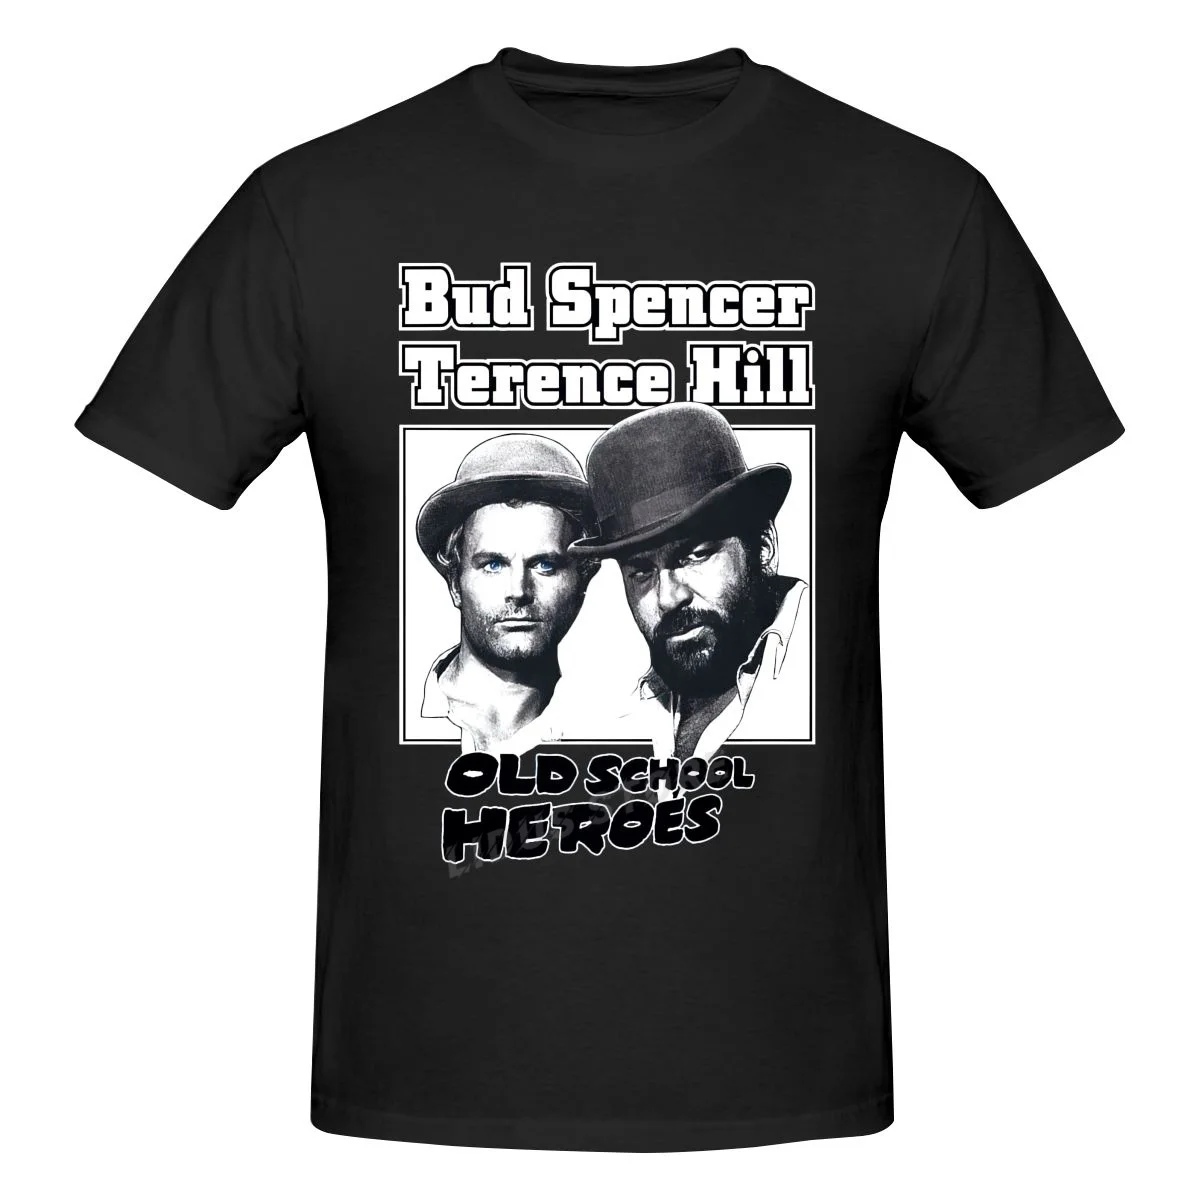 

Bud Spencer And Terence Hill Old School Heroes T shirt Harajuku Clothing Short Sleeve Cotton Streetwear Graphic Tshirt Tees